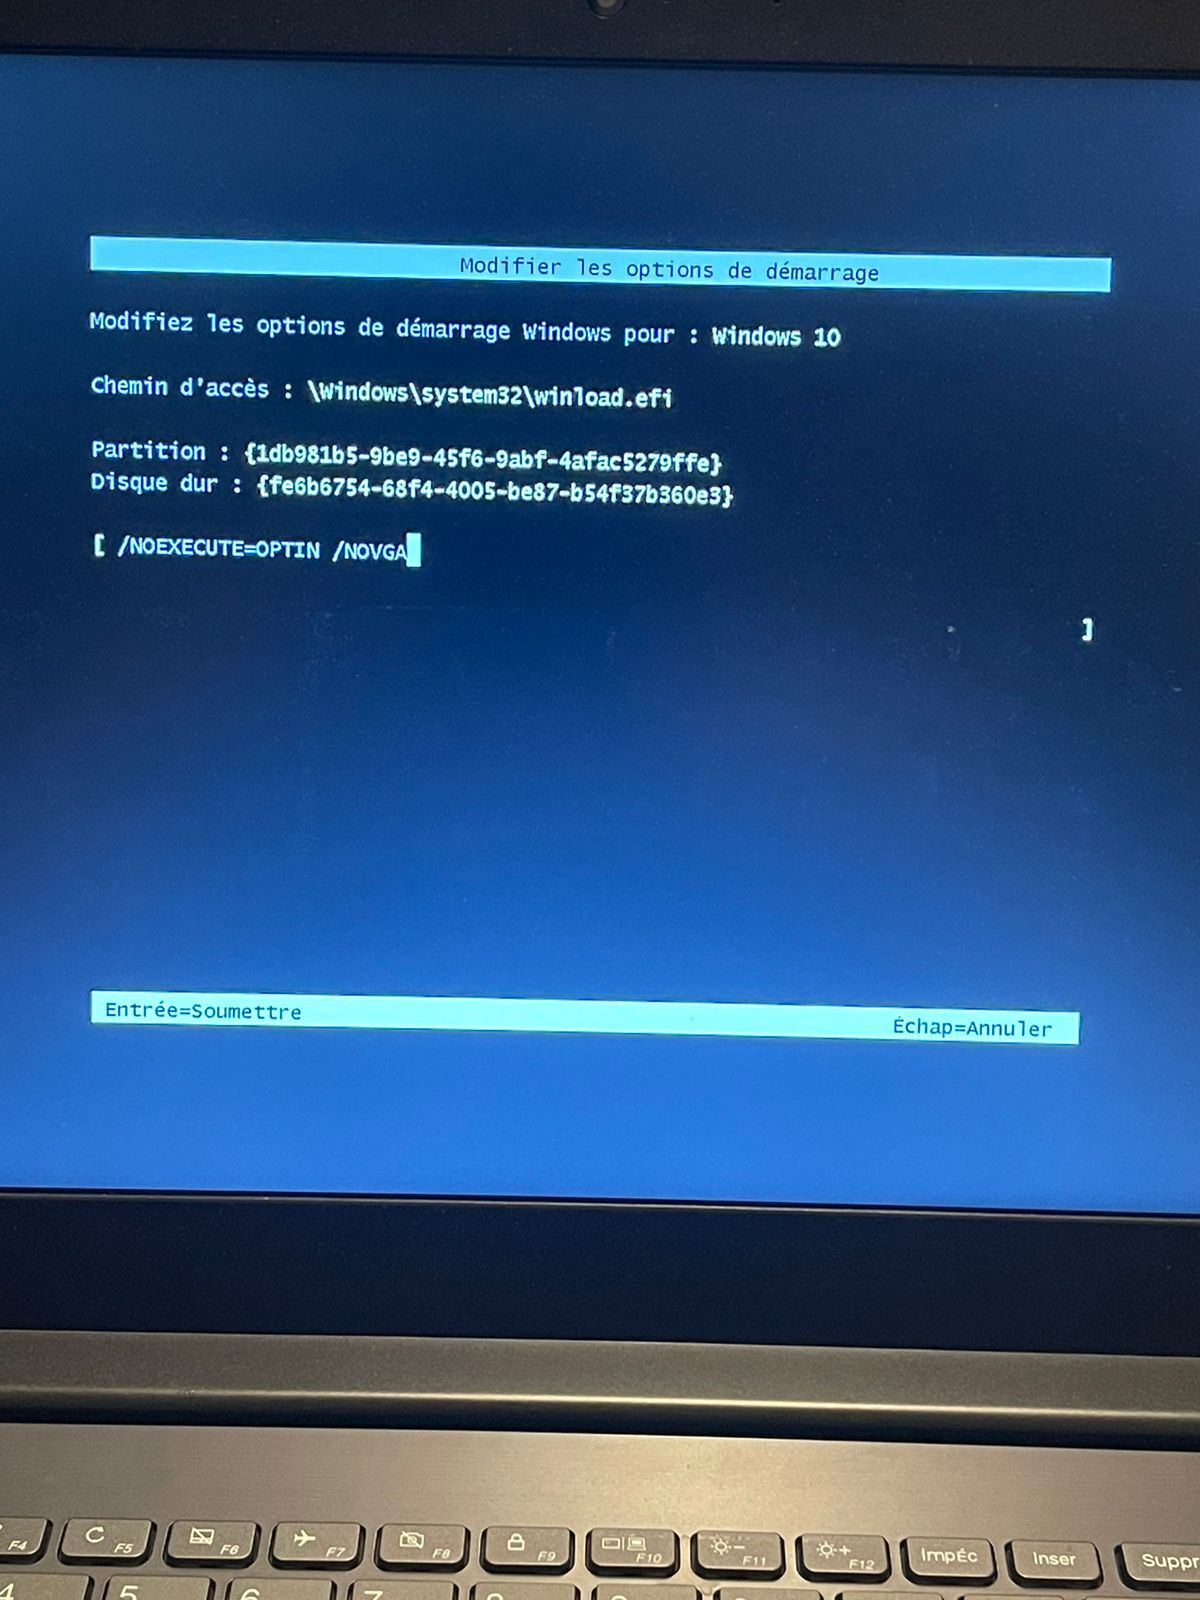 Problem-with-my-lenovo-stuck-in-the-boot-manager-and-the-keyboard-won-t -work-to-boot-it - English Community - LENOVO COMMUNITY